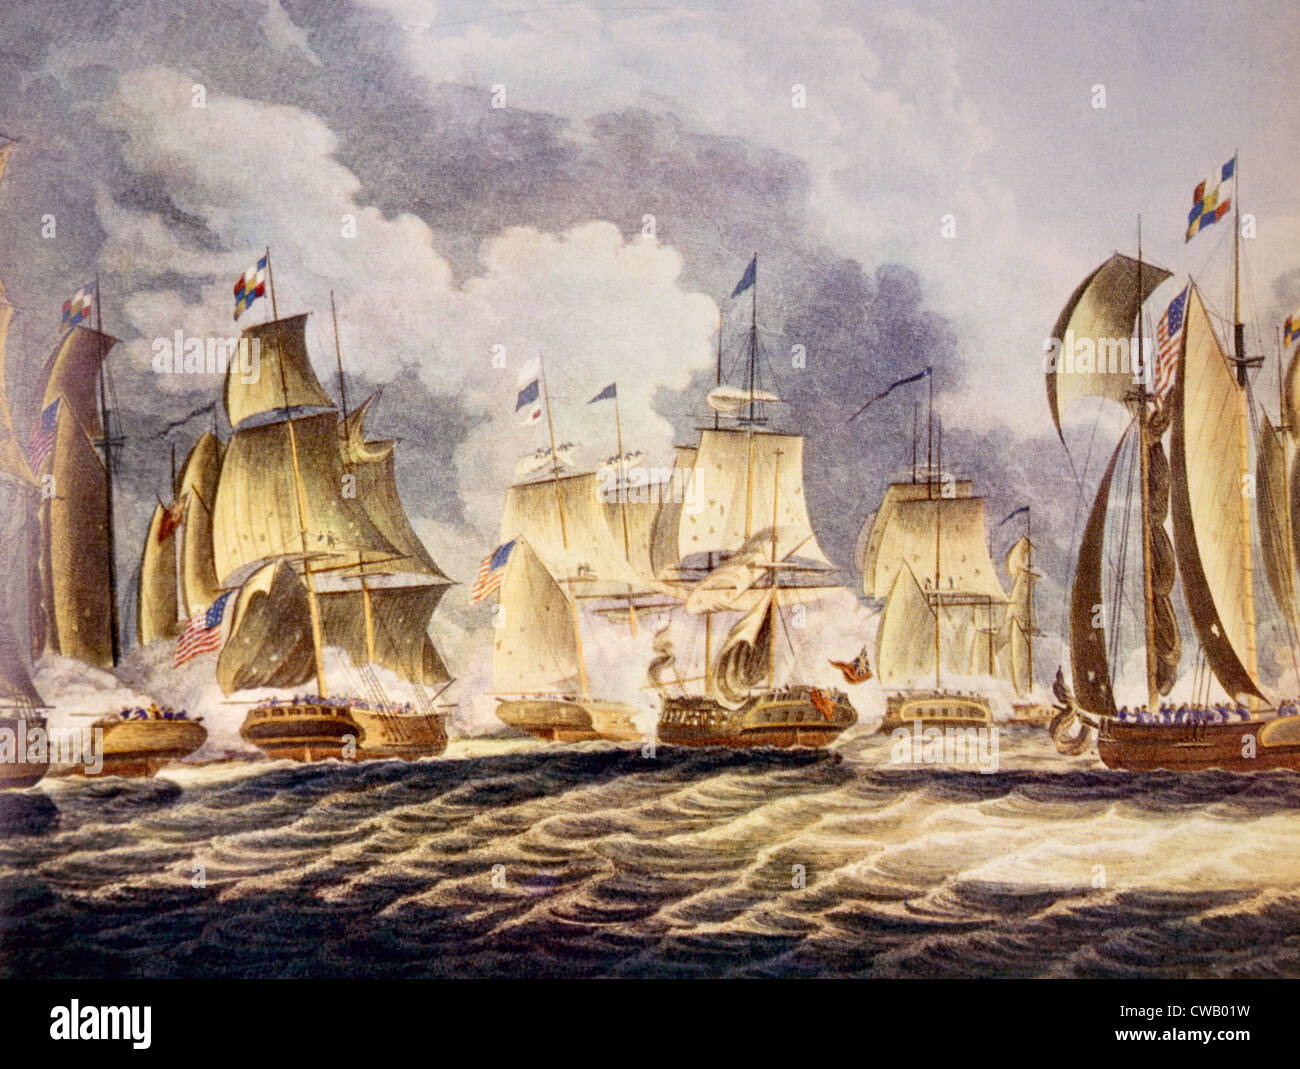 The Battle of Lake Erie, Commodore Perry's abandoned warship 'Lawrence' at the right, 1813 Stock Photo